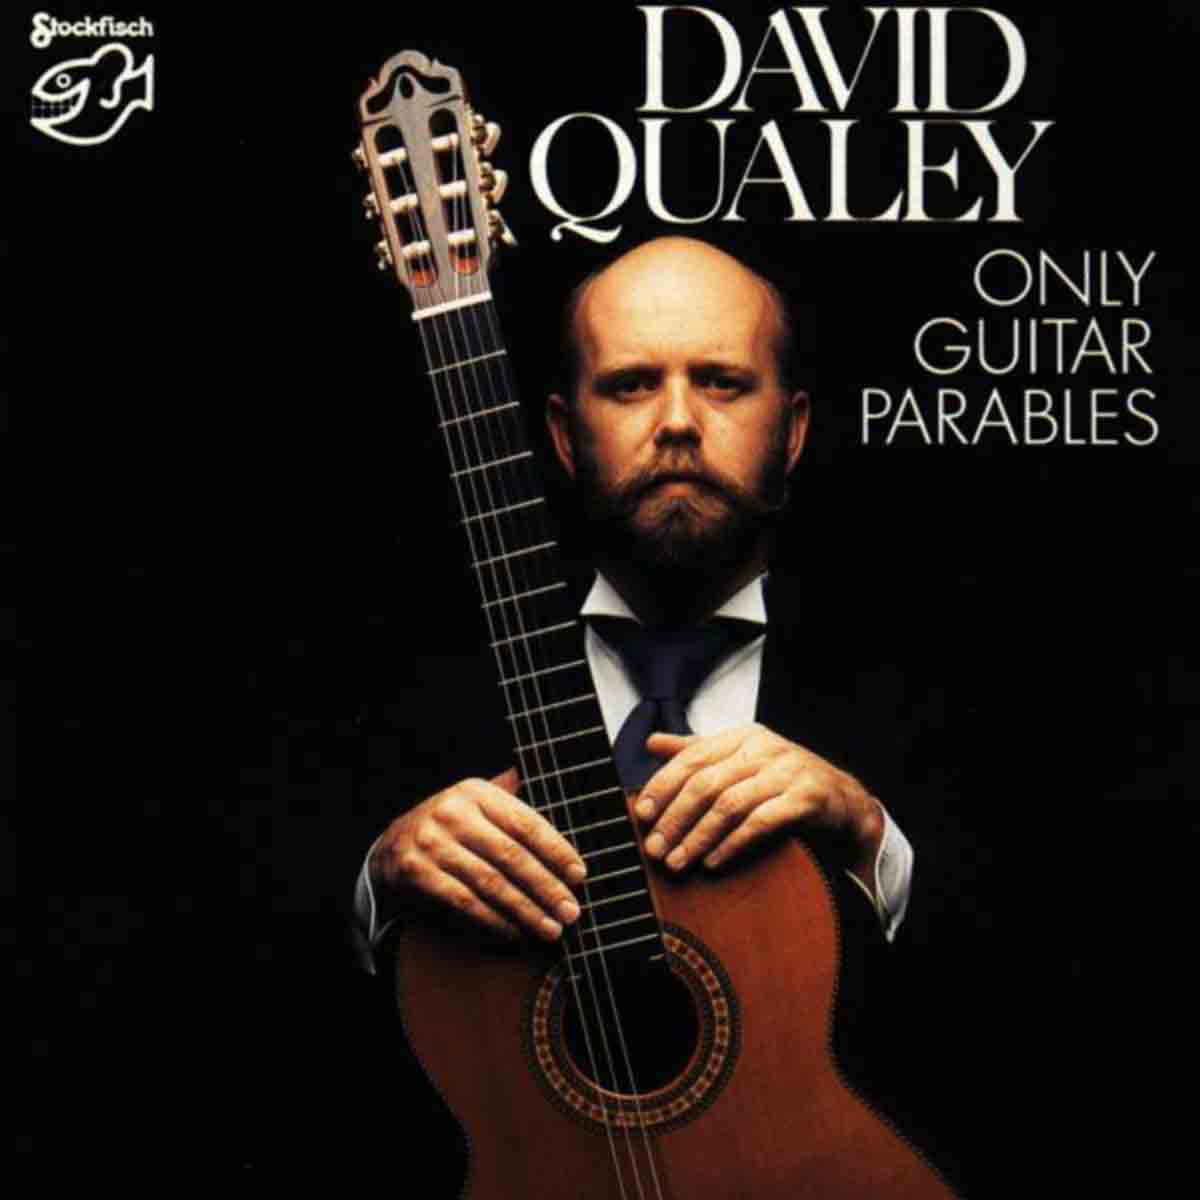 Only Guitar Parables